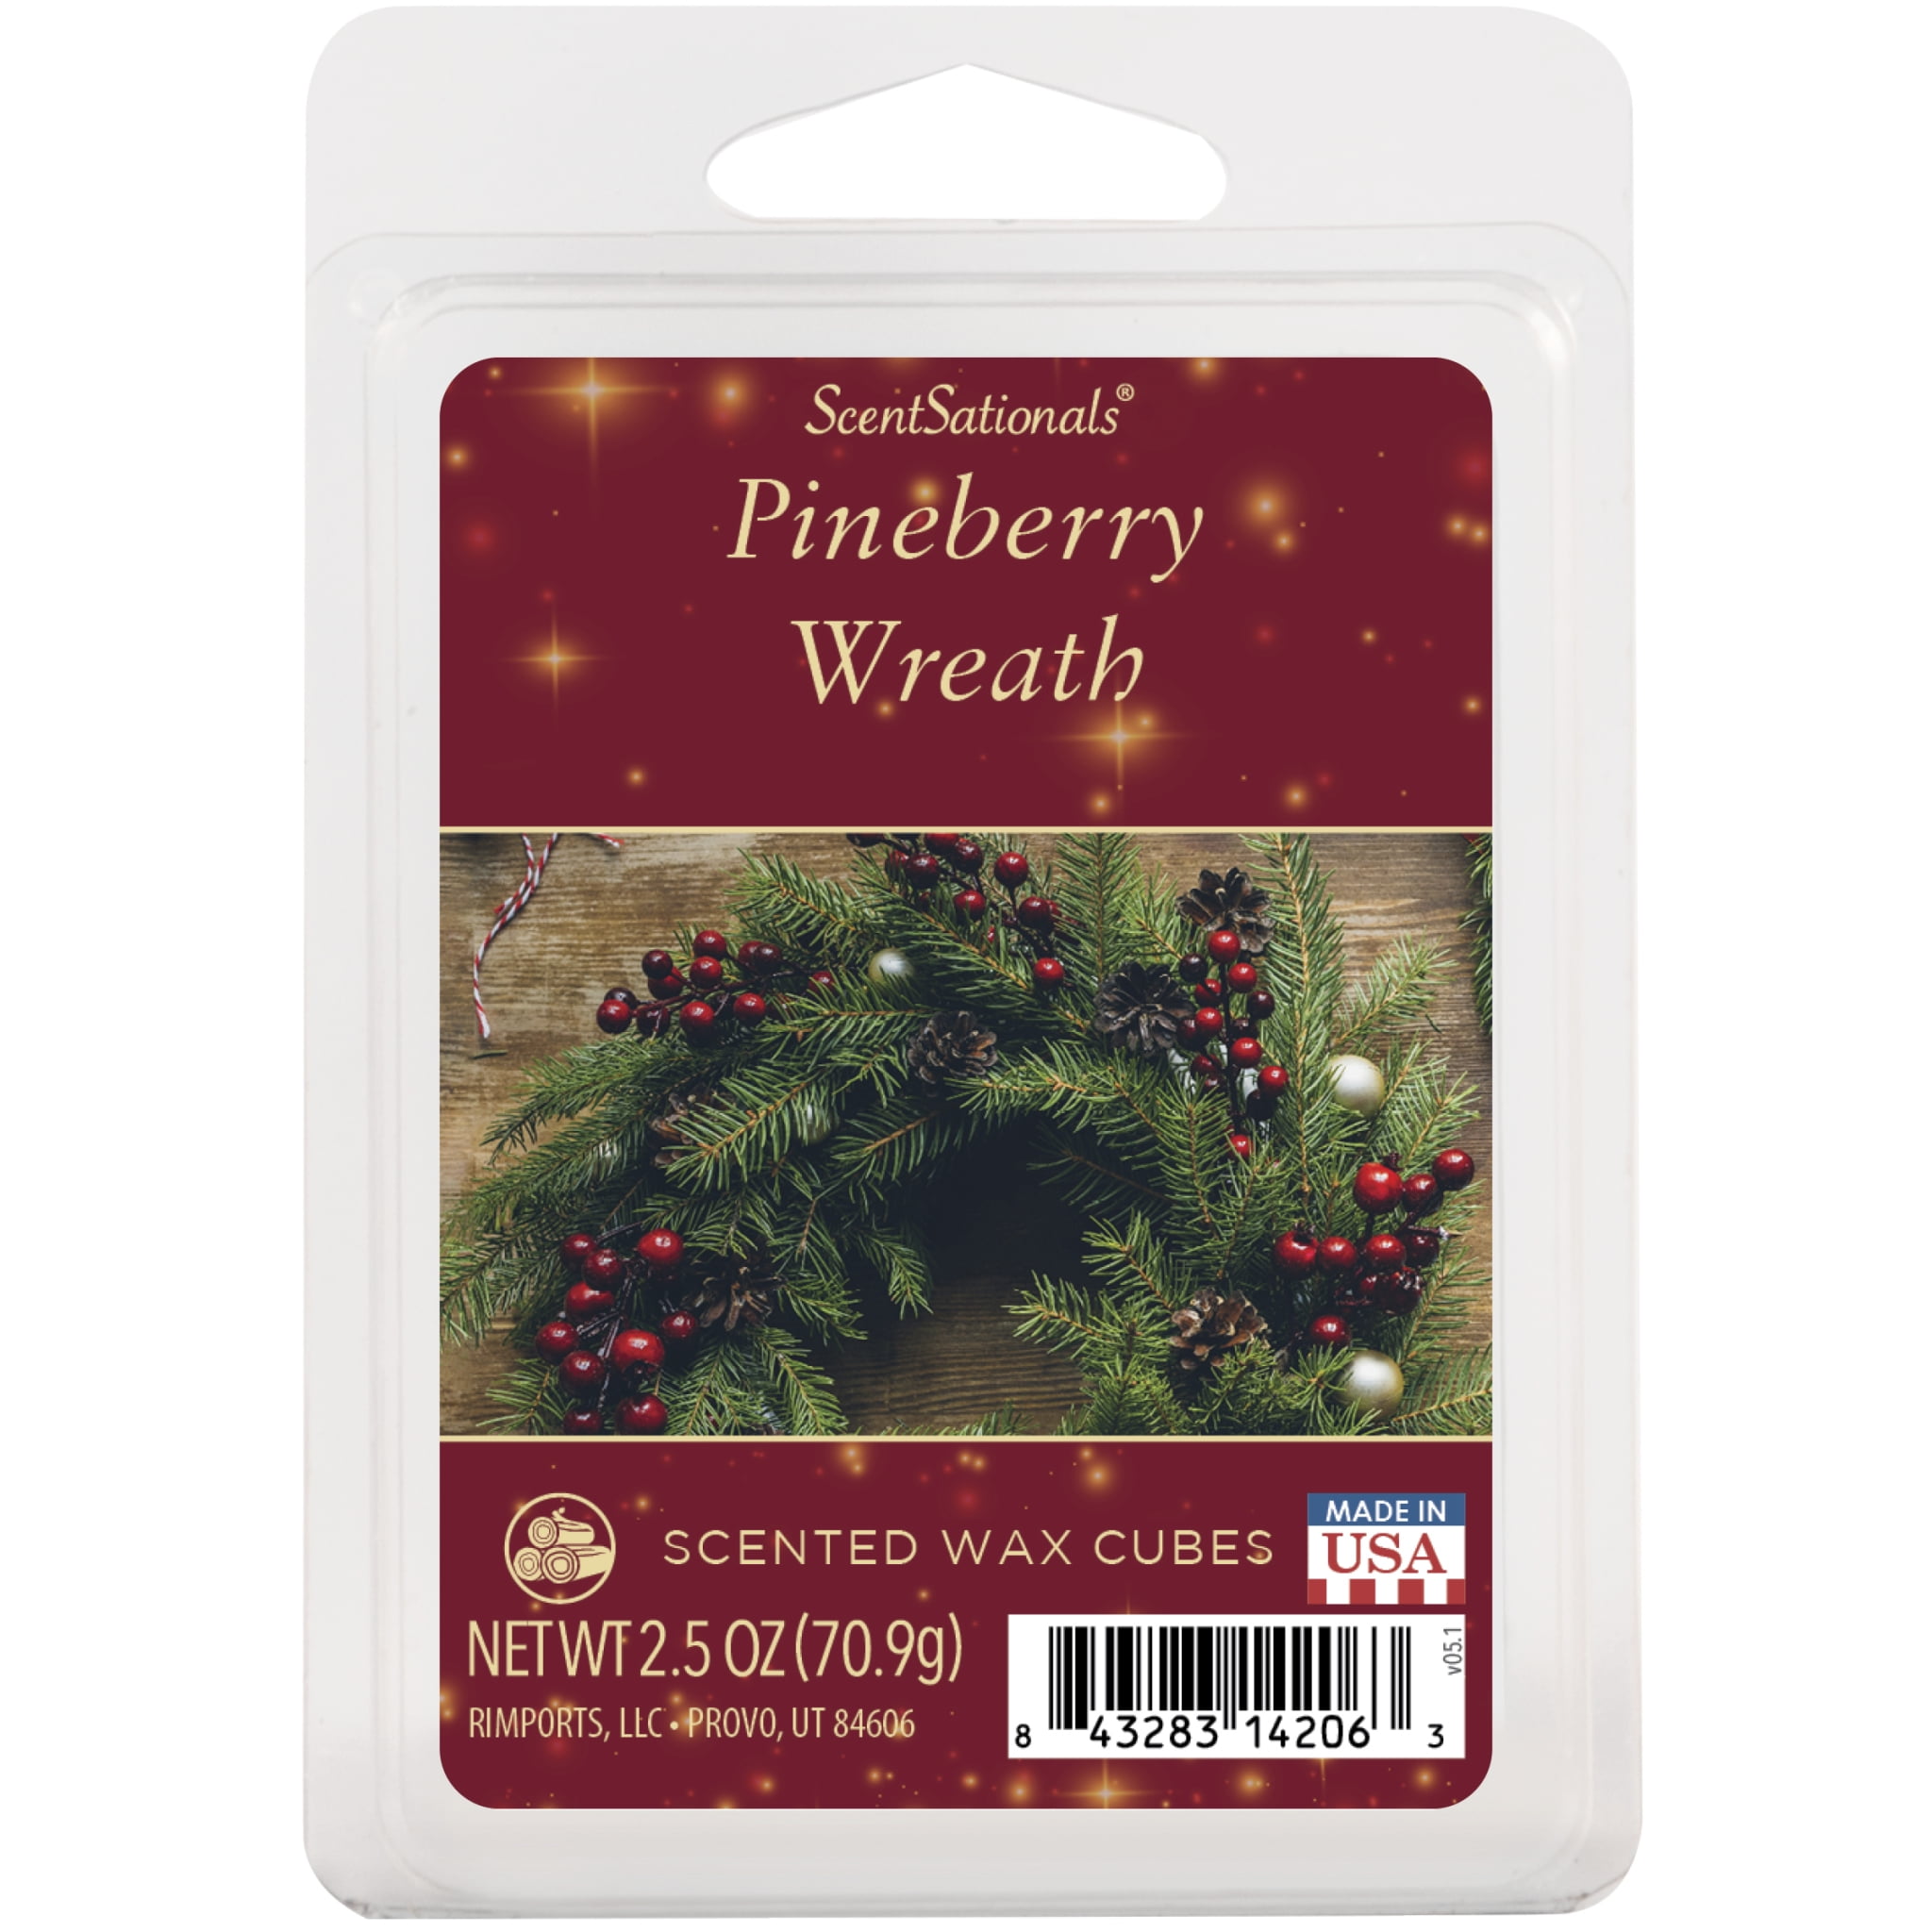 Pineberry Wreath Scented Wax Melts, ScentSationals, 2.5 oz (1-Pack)